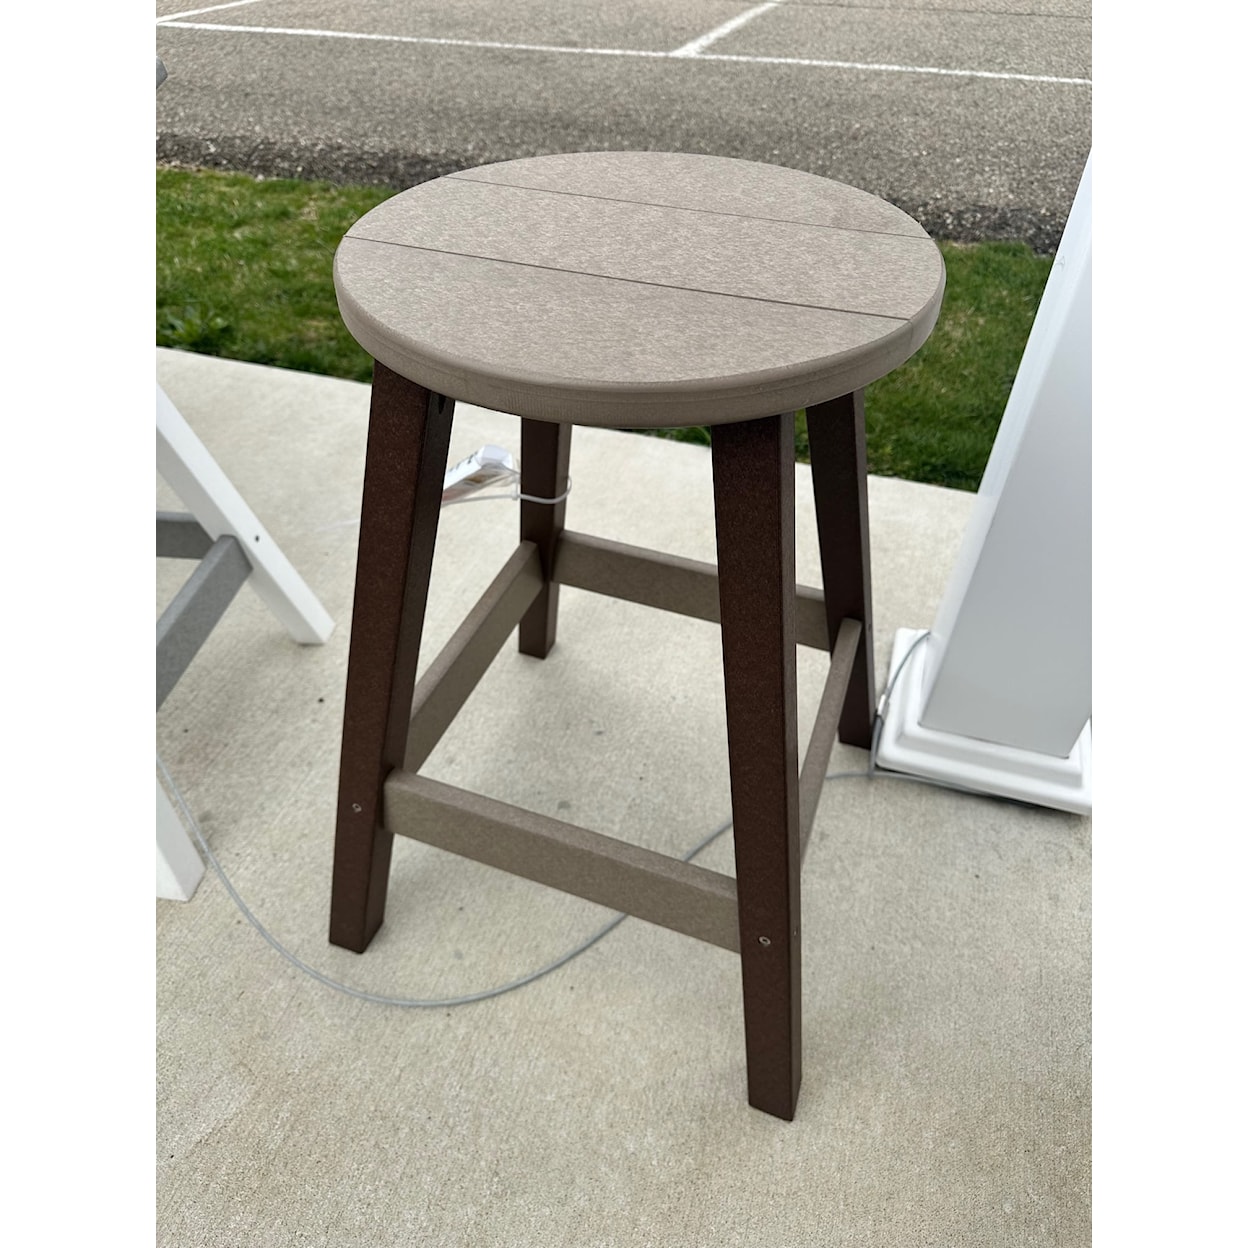 Hoosier Poly Products Barstools and Benches Outdoor Bar Stool